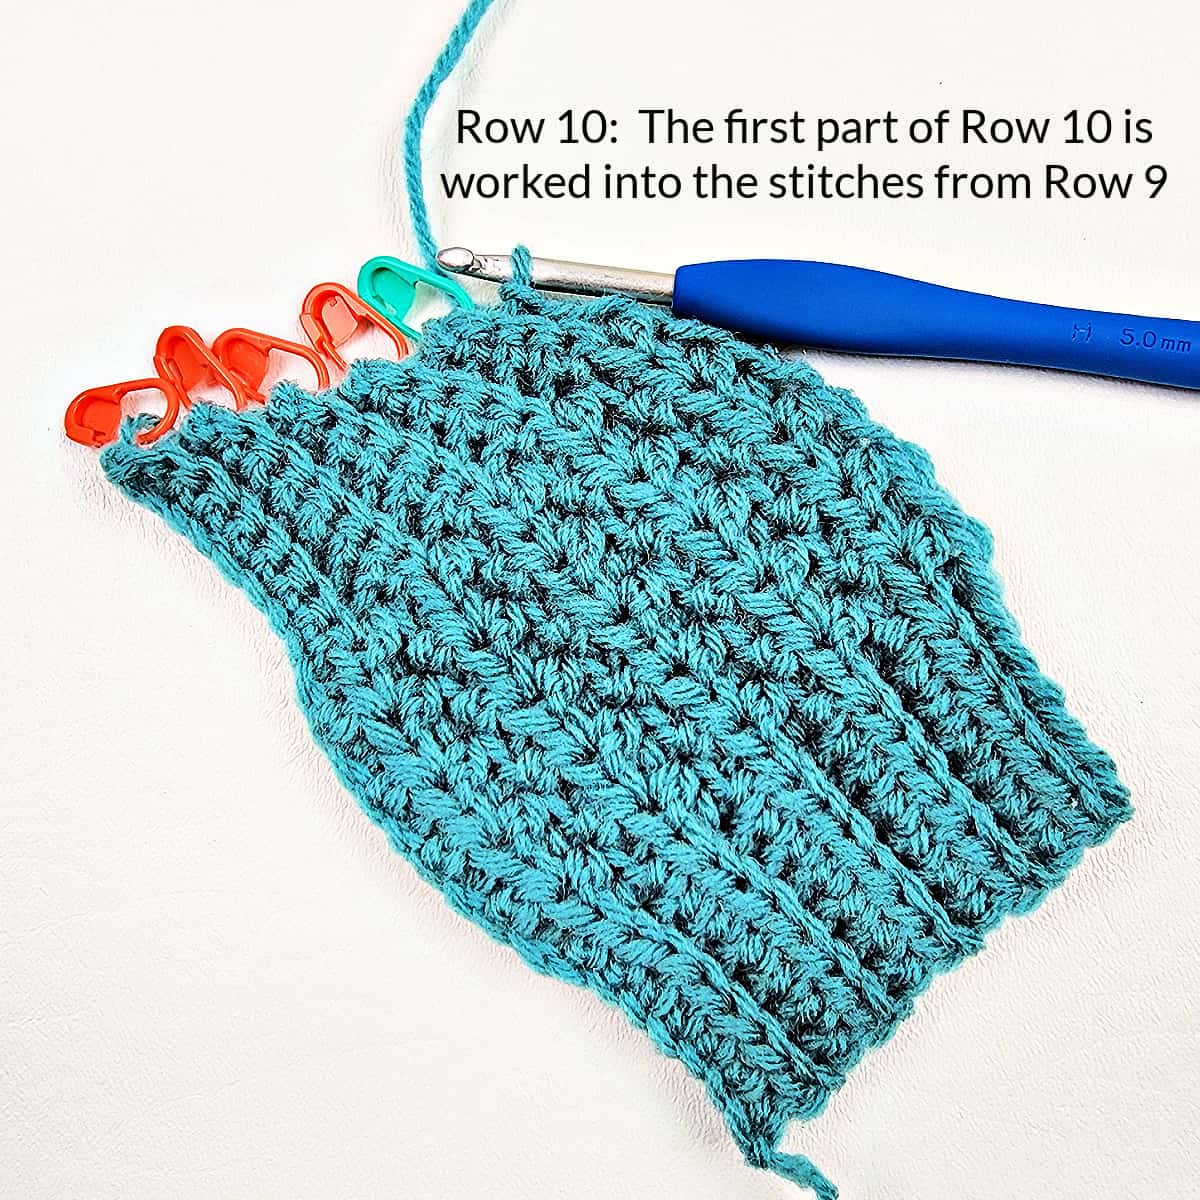 The first stitch of row ten is worked into the stitches from row nine.